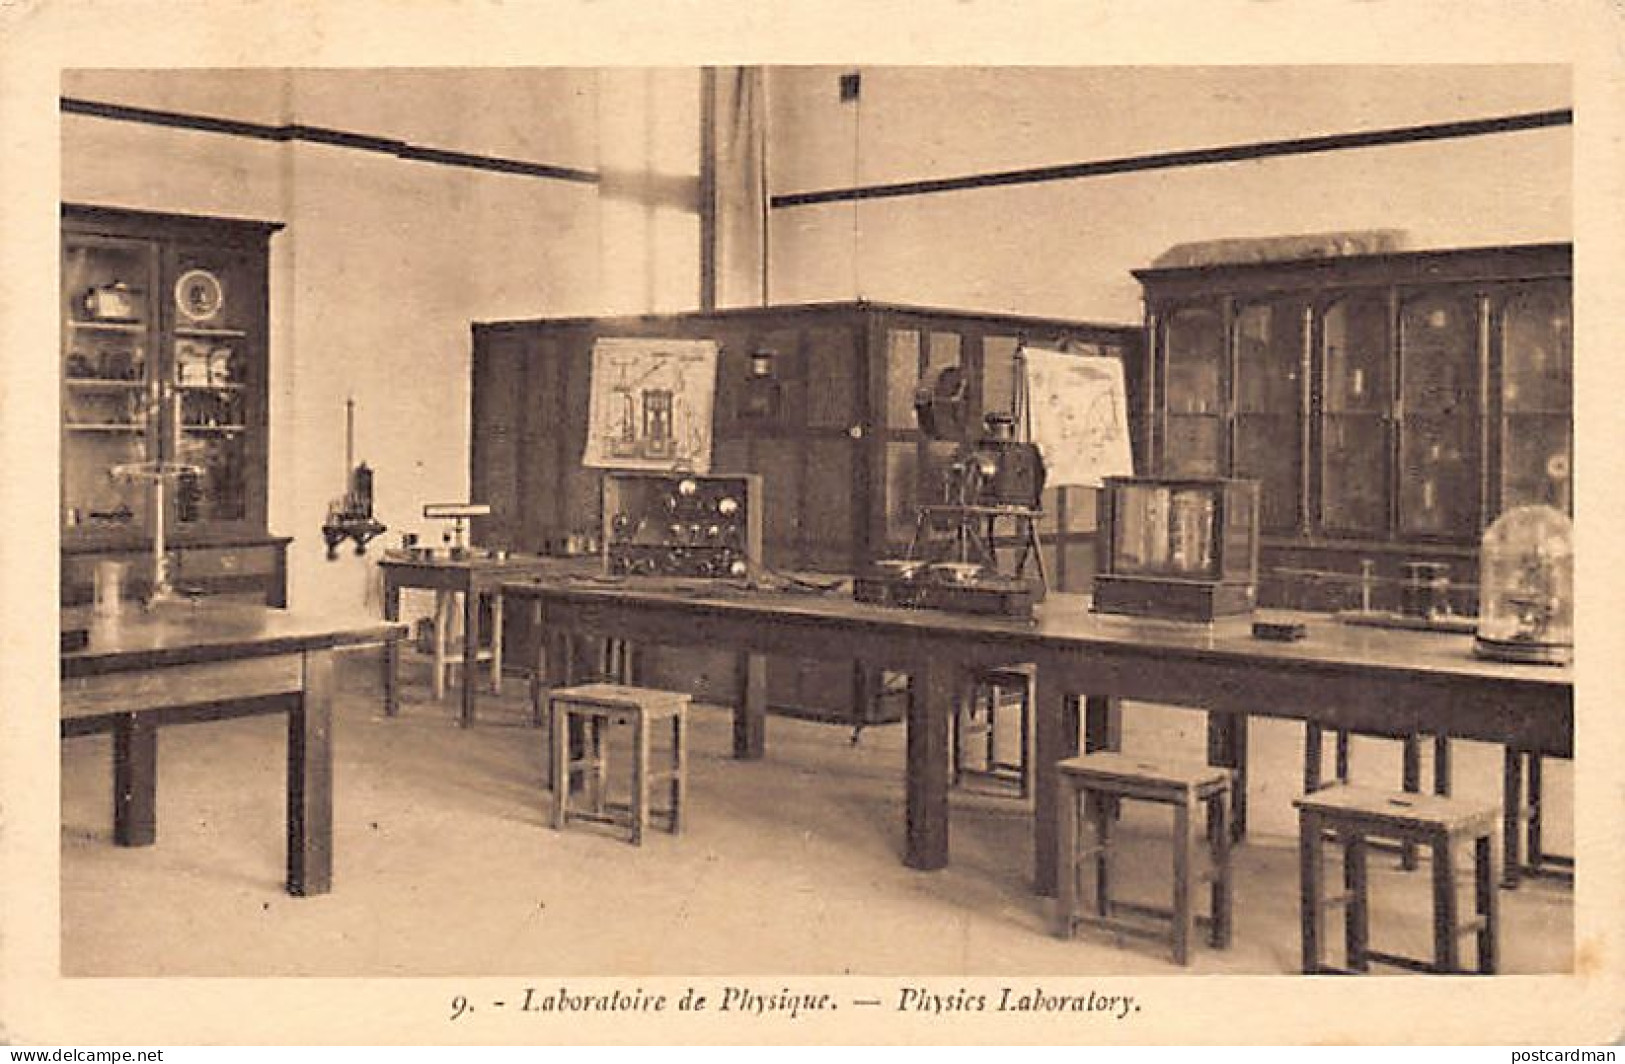 China - TIANJIN Institute Of Advanced Industrial And Commercial Studies - Physics Laboratory - China